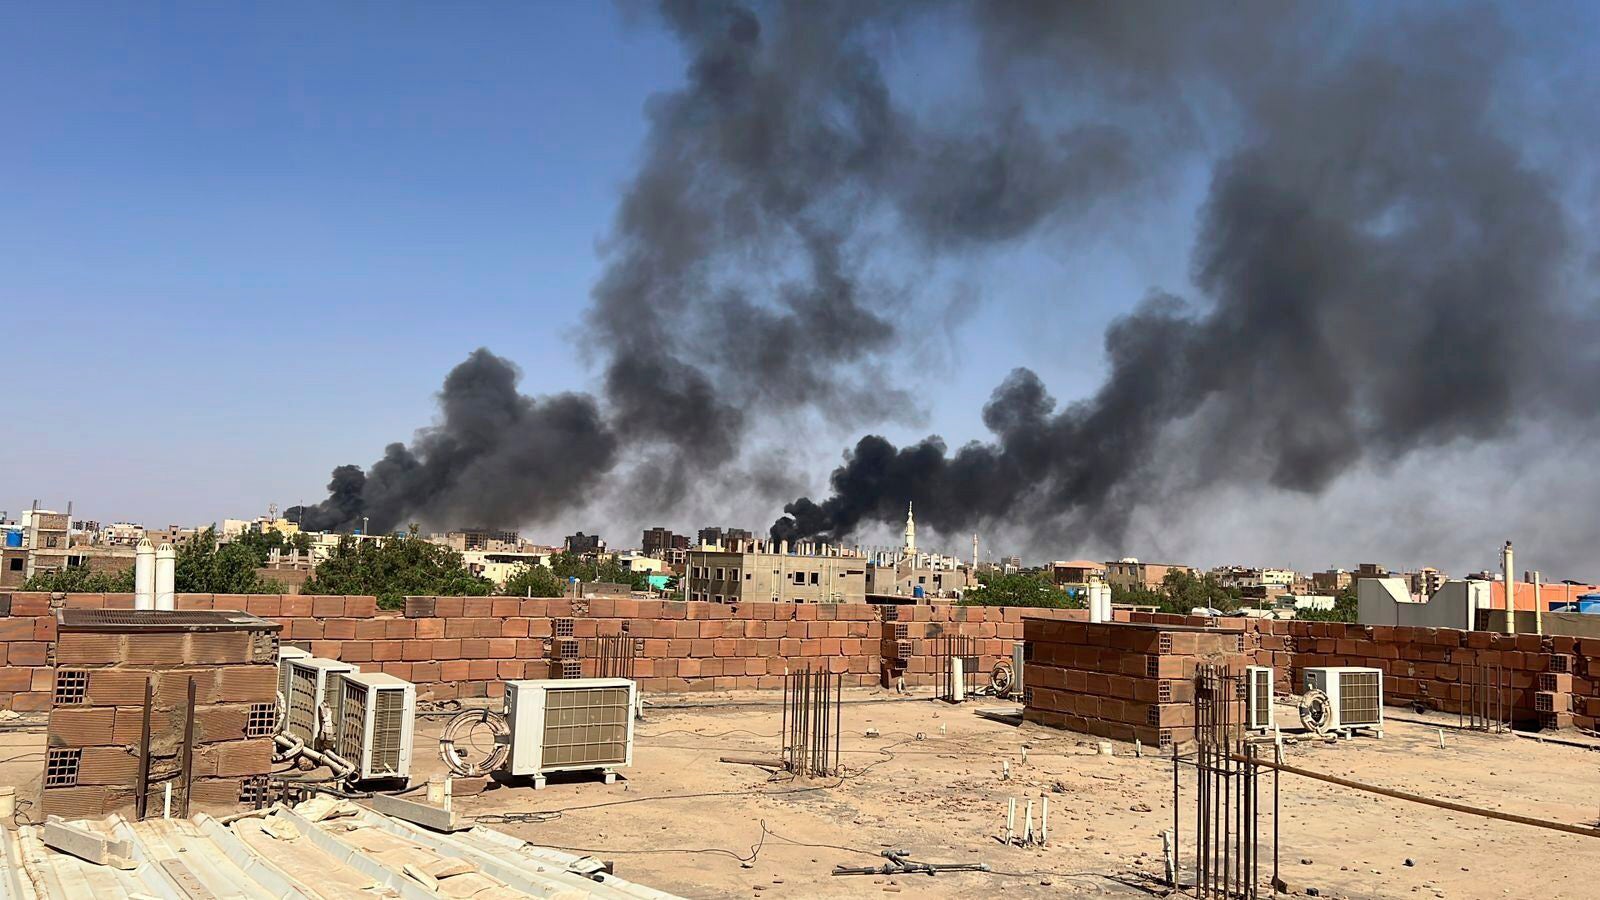 Smoke fills the sky in Khartoum amid increasing violence and dwindling supplies